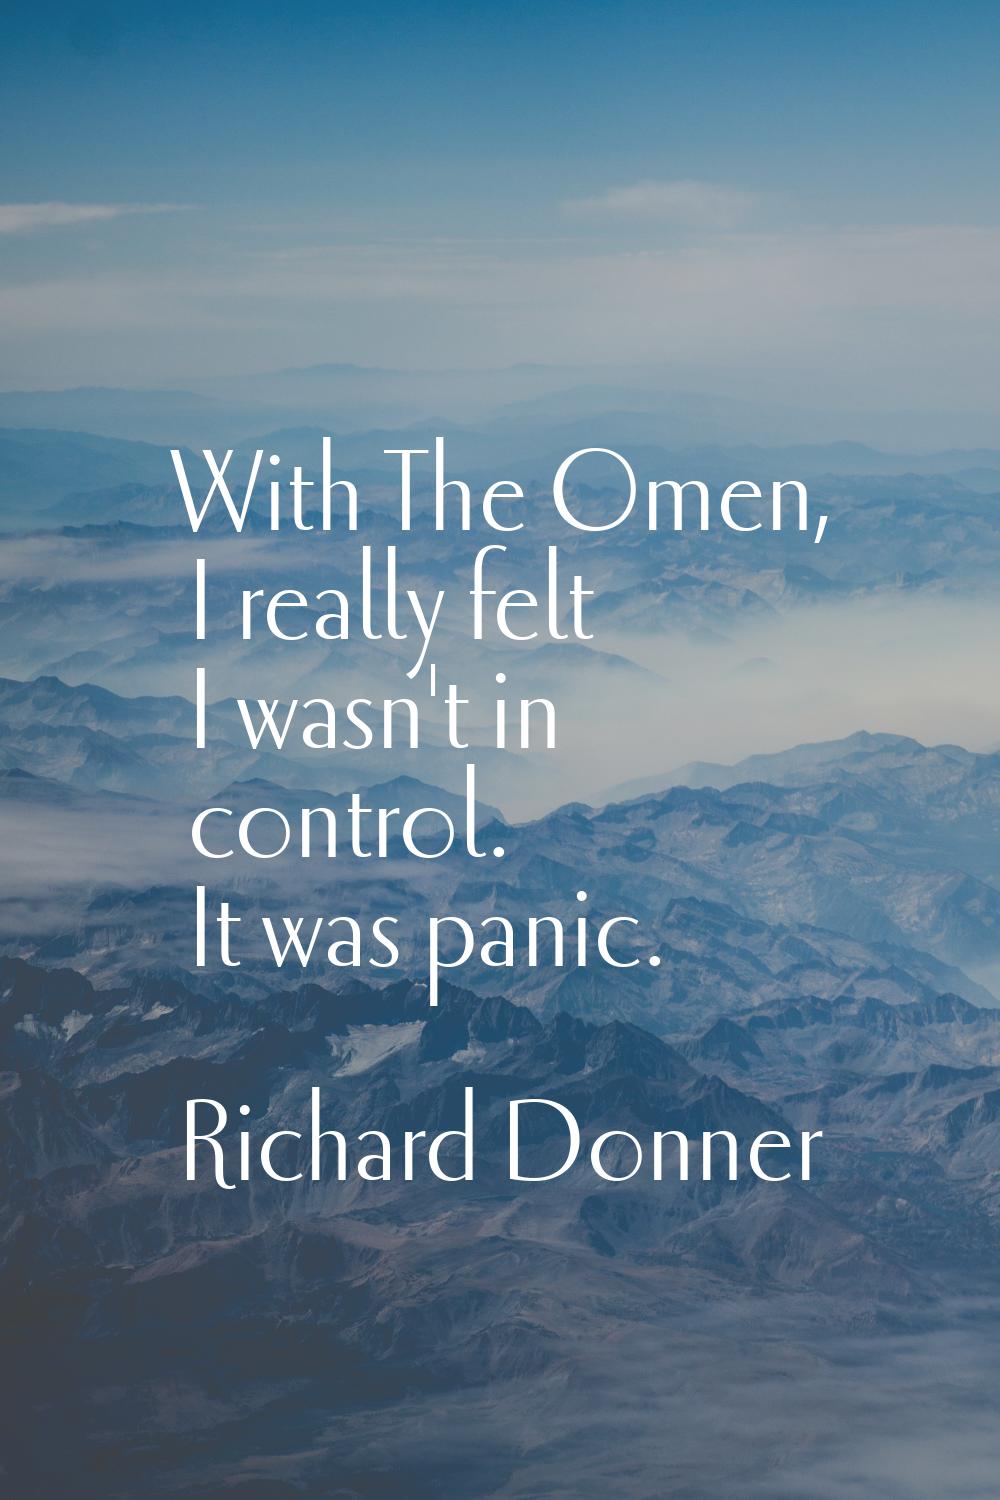 With The Omen, I really felt I wasn't in control. It was panic.